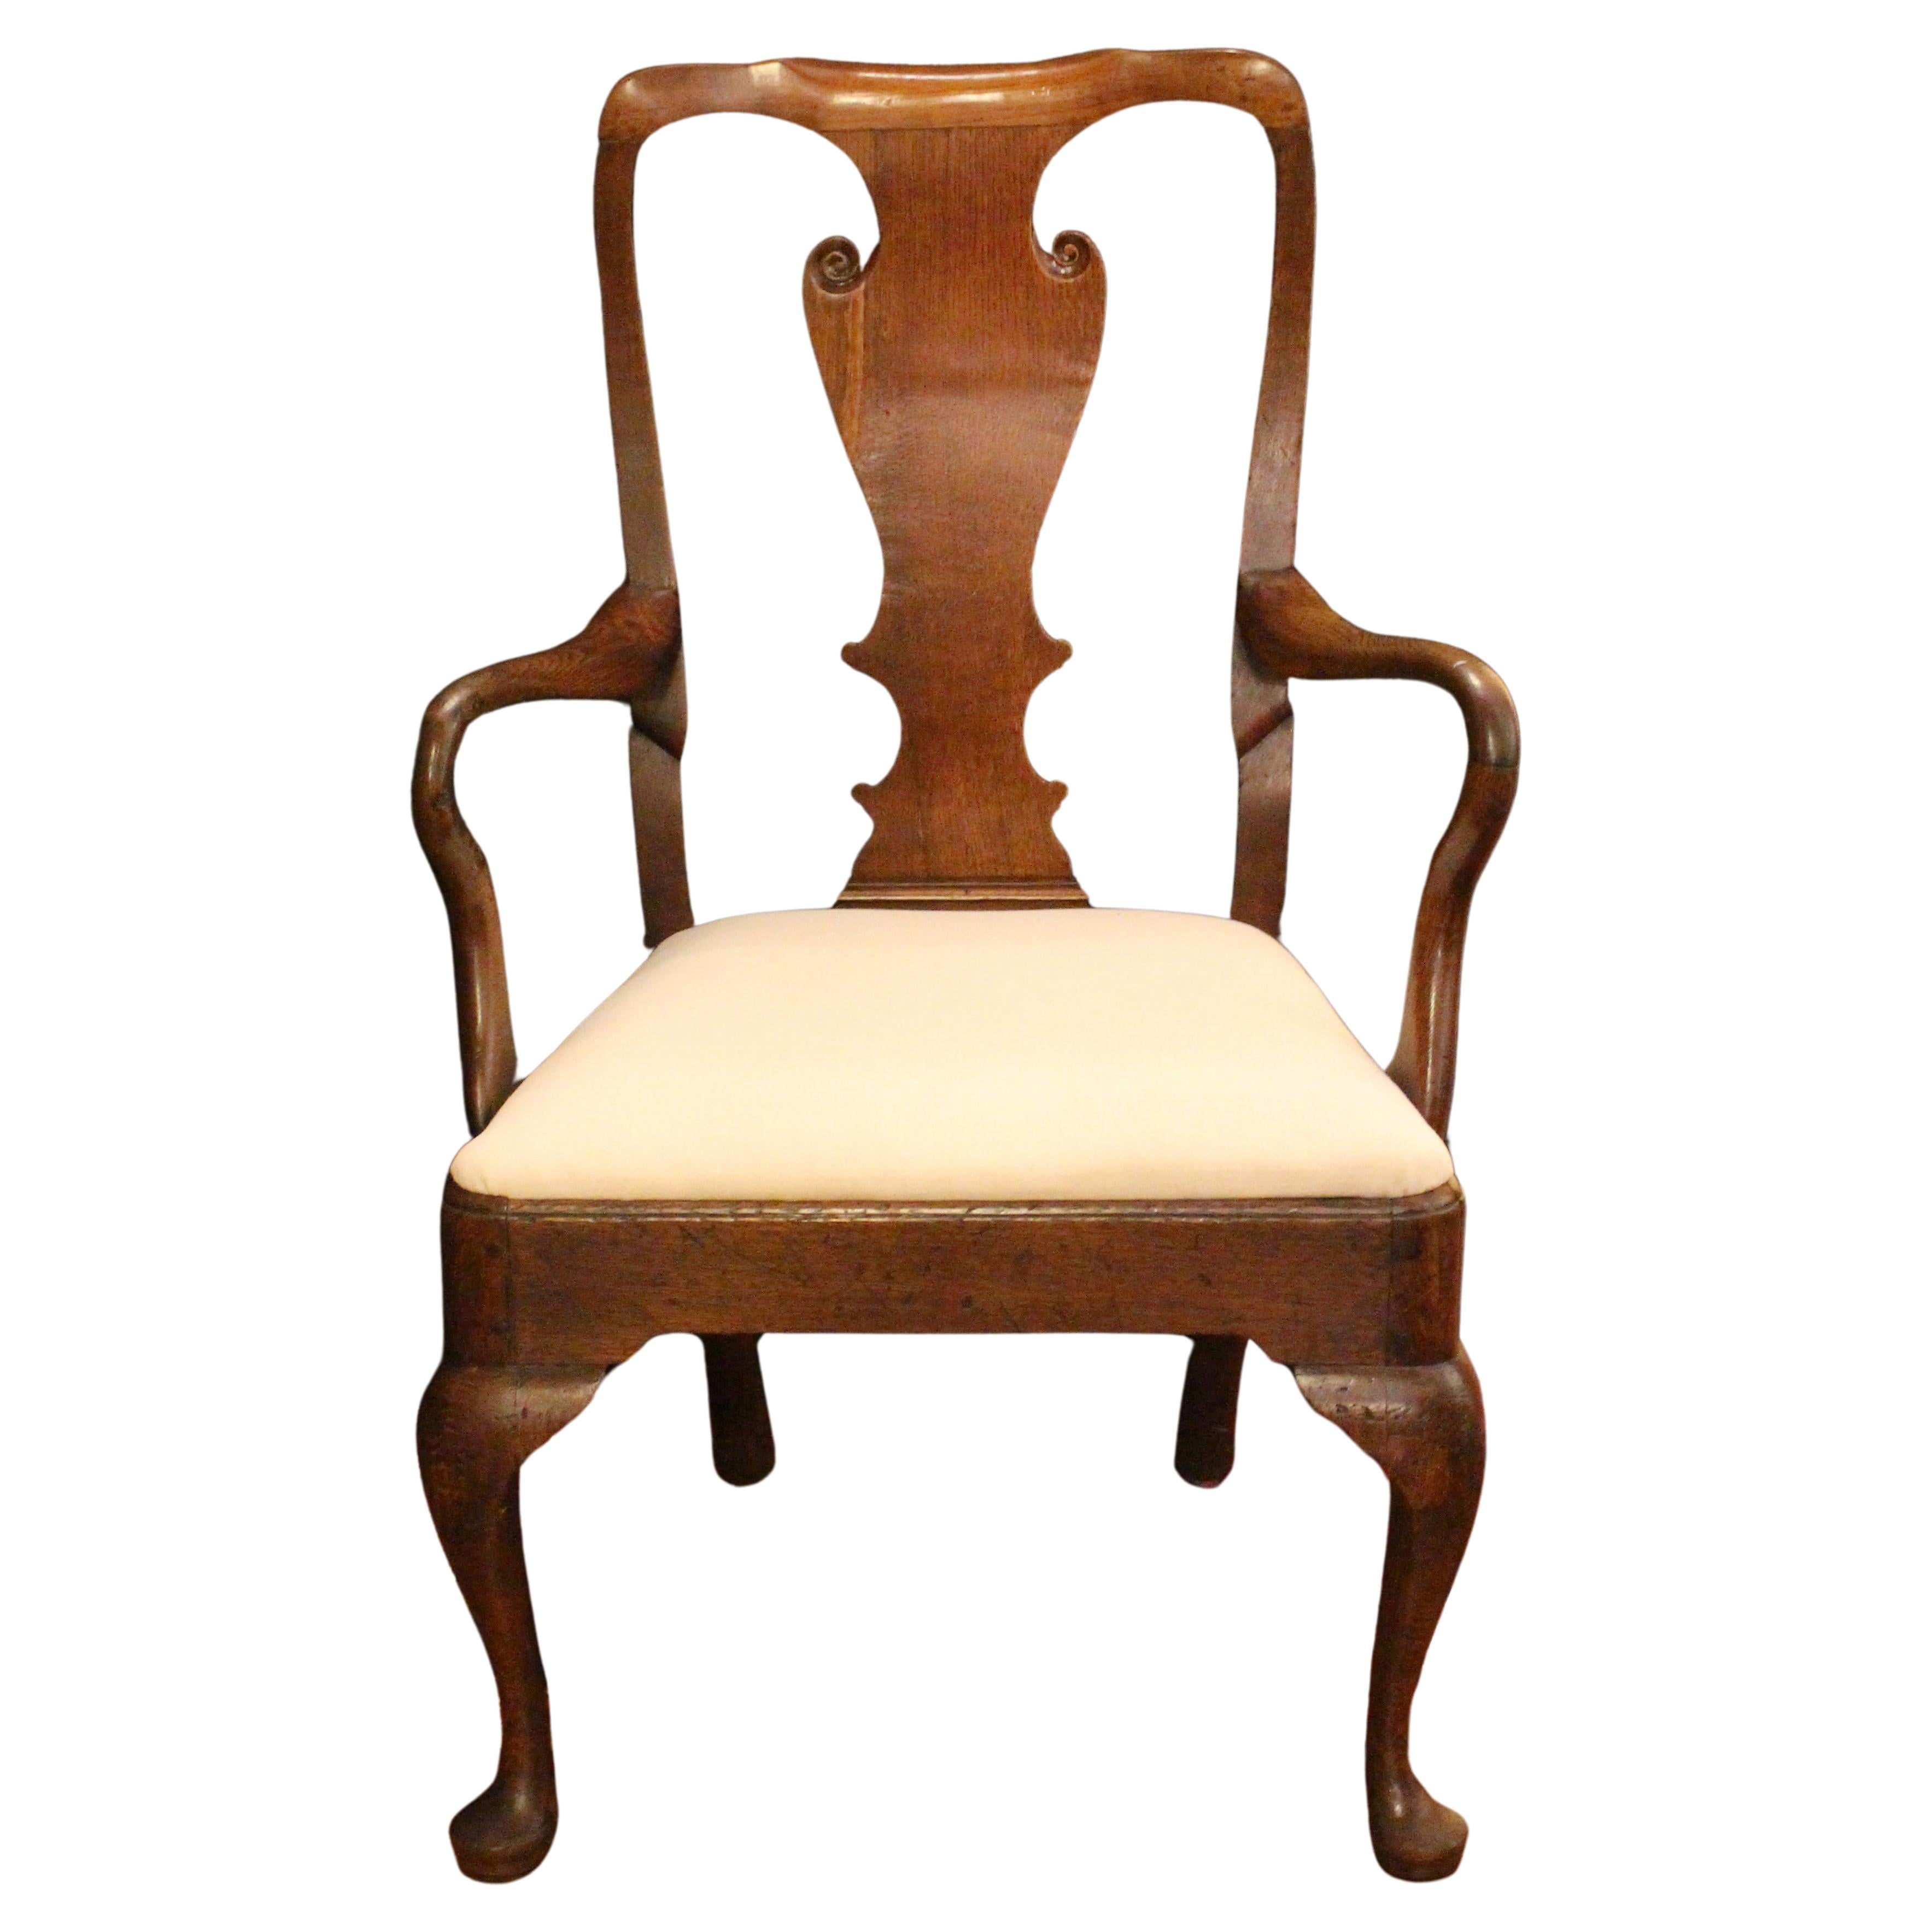 Early-Mid 18th Century Queen Anne Arm Chair